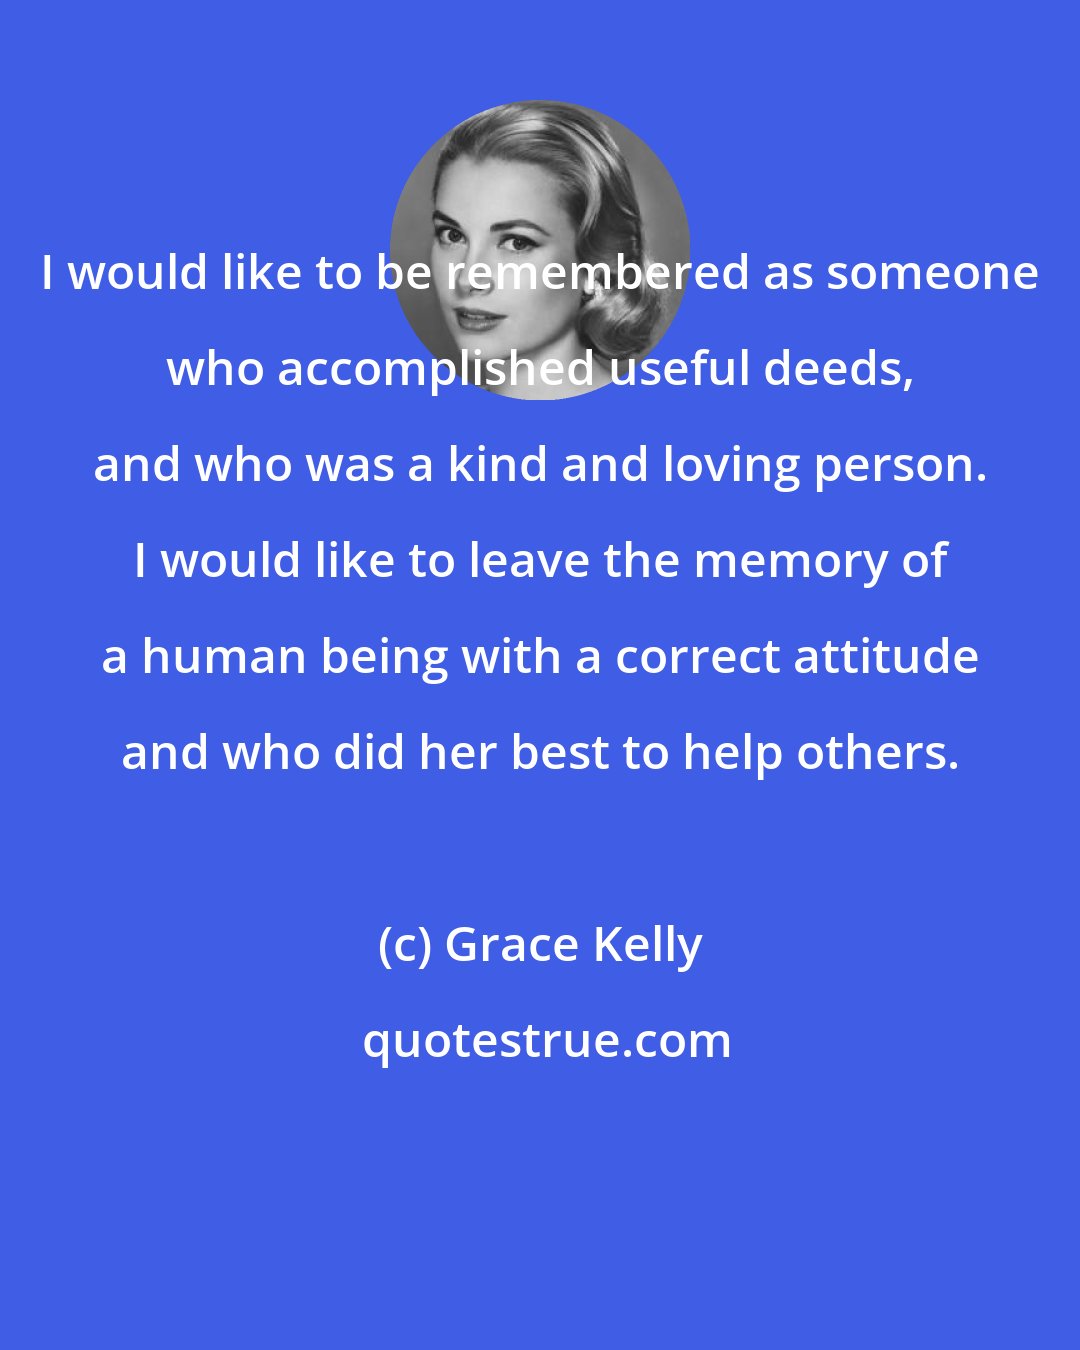 Grace Kelly: I would like to be remembered as someone who accomplished useful deeds, and who was a kind and loving person. I would like to leave the memory of a human being with a correct attitude and who did her best to help others.